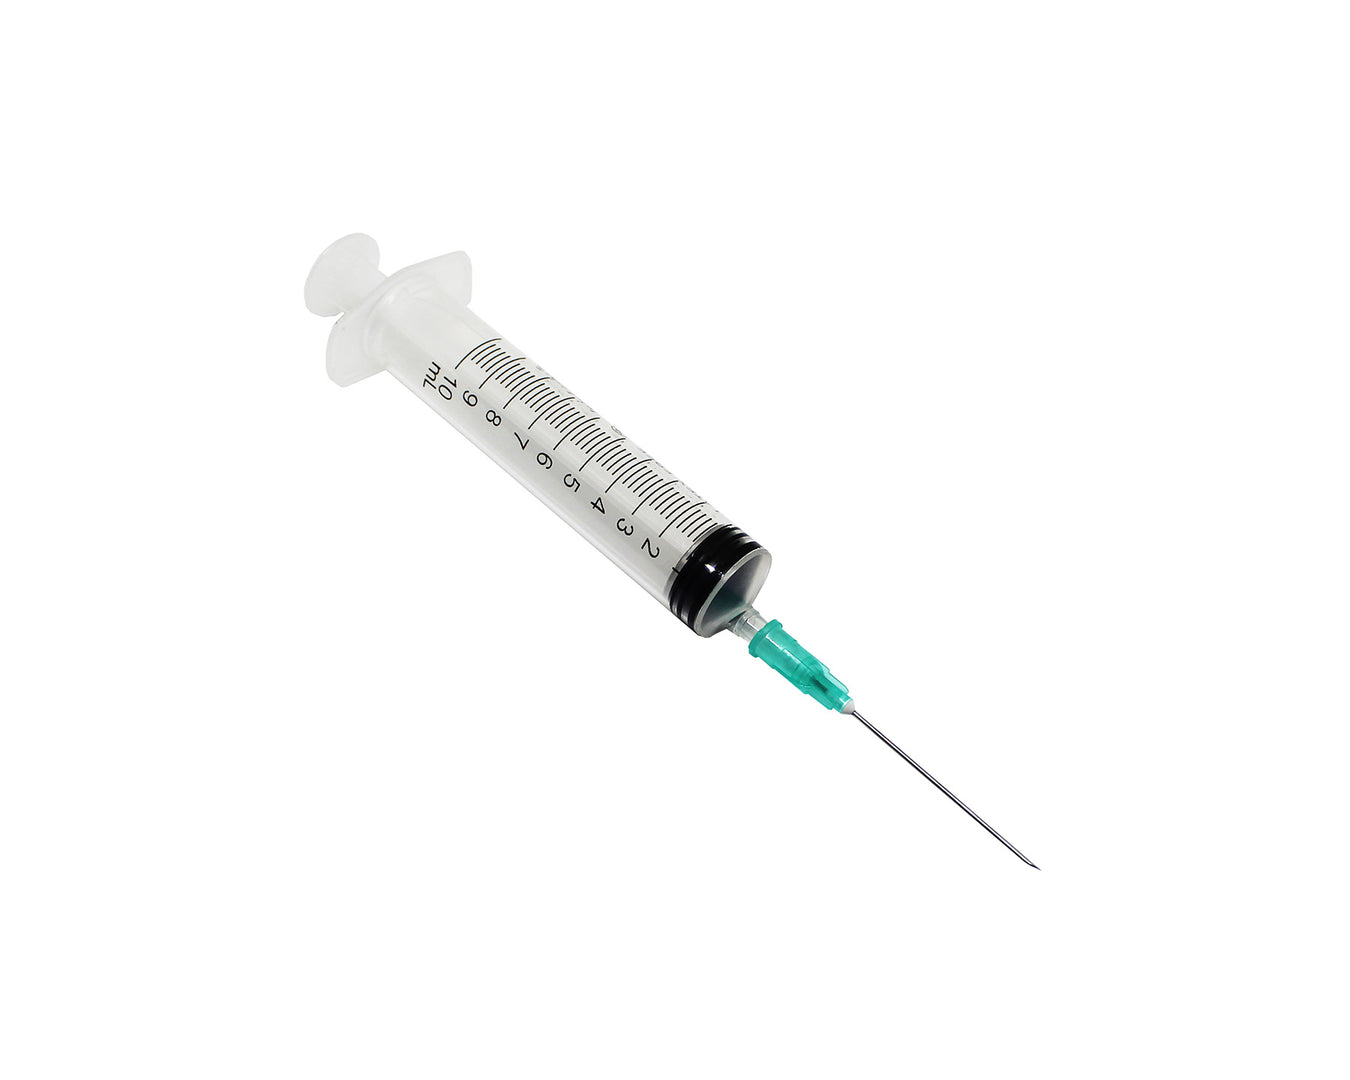 10ml eccentric syringe with 21g hypodermic needle